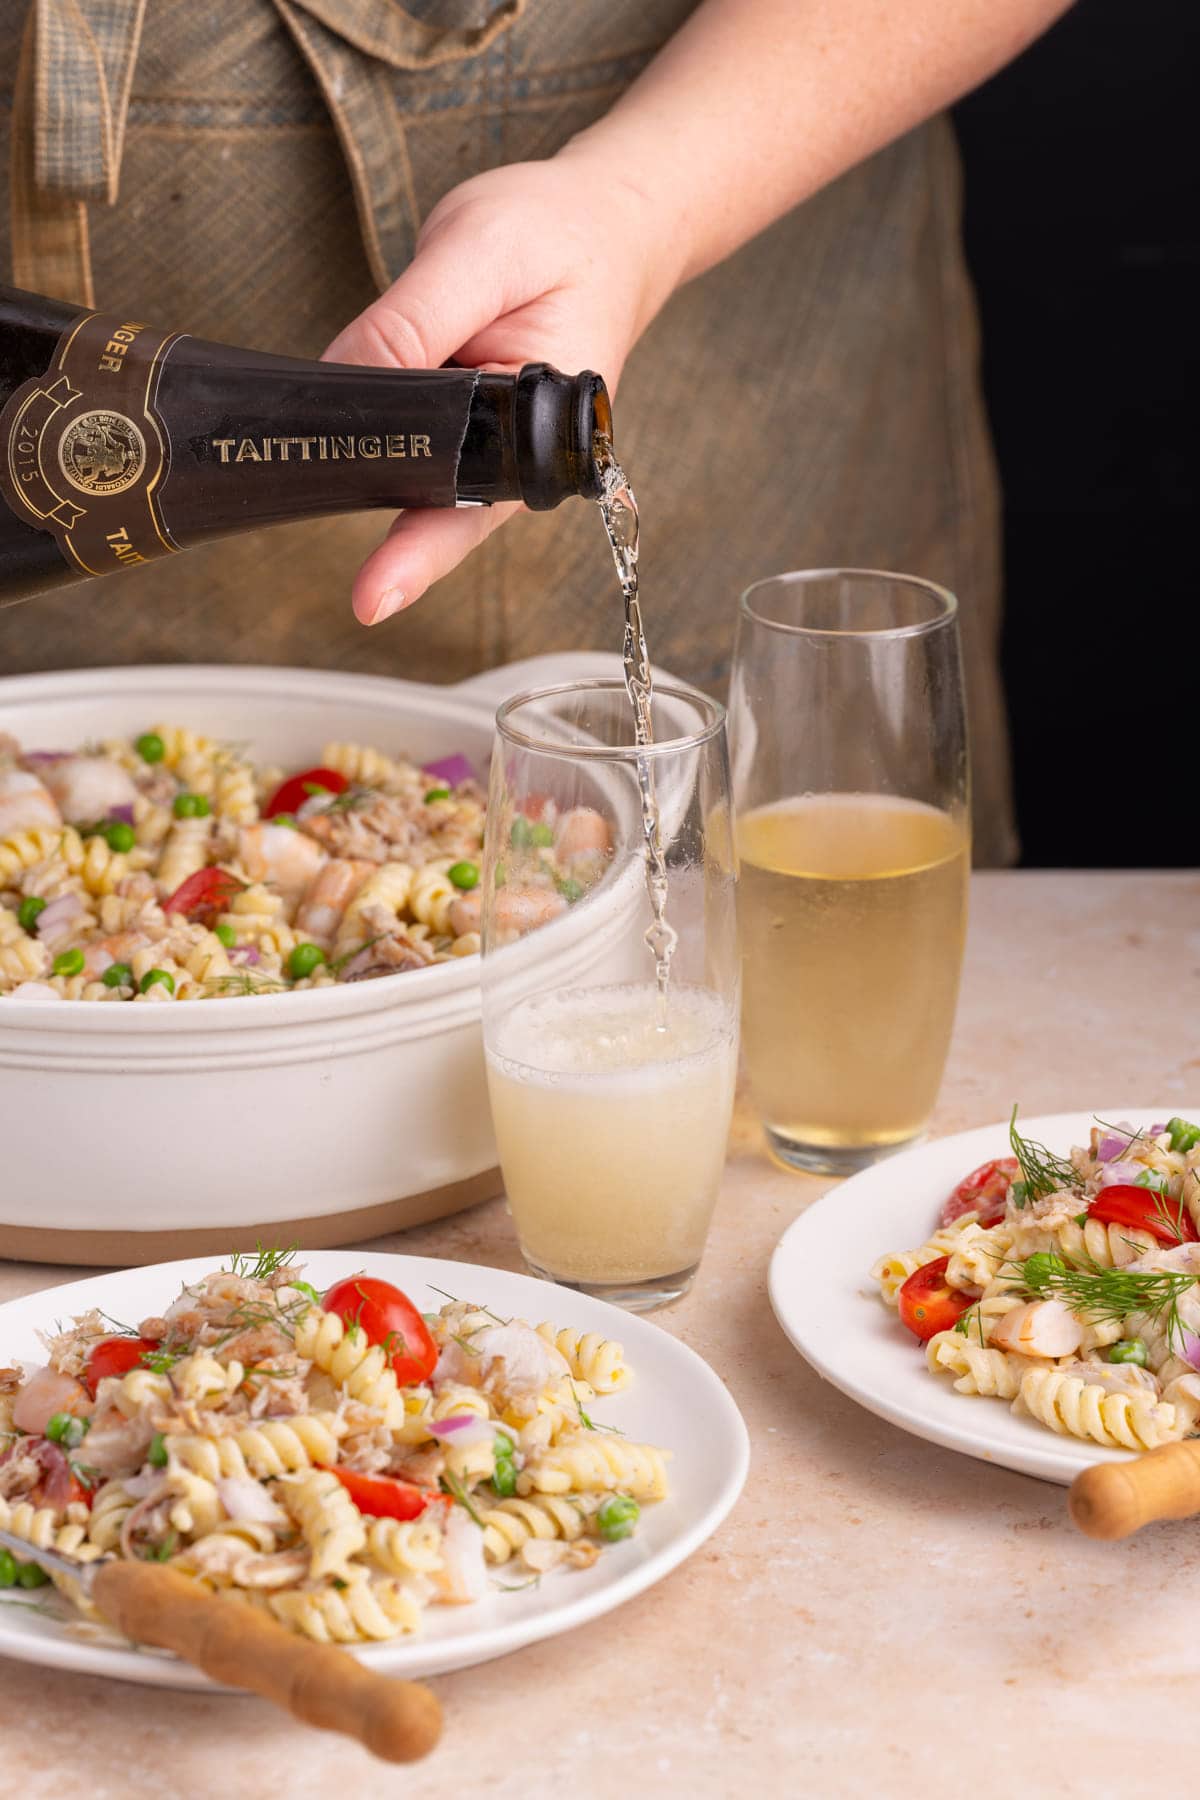 Pouring glass of champagne to serve with Pasta Salad with Seafood